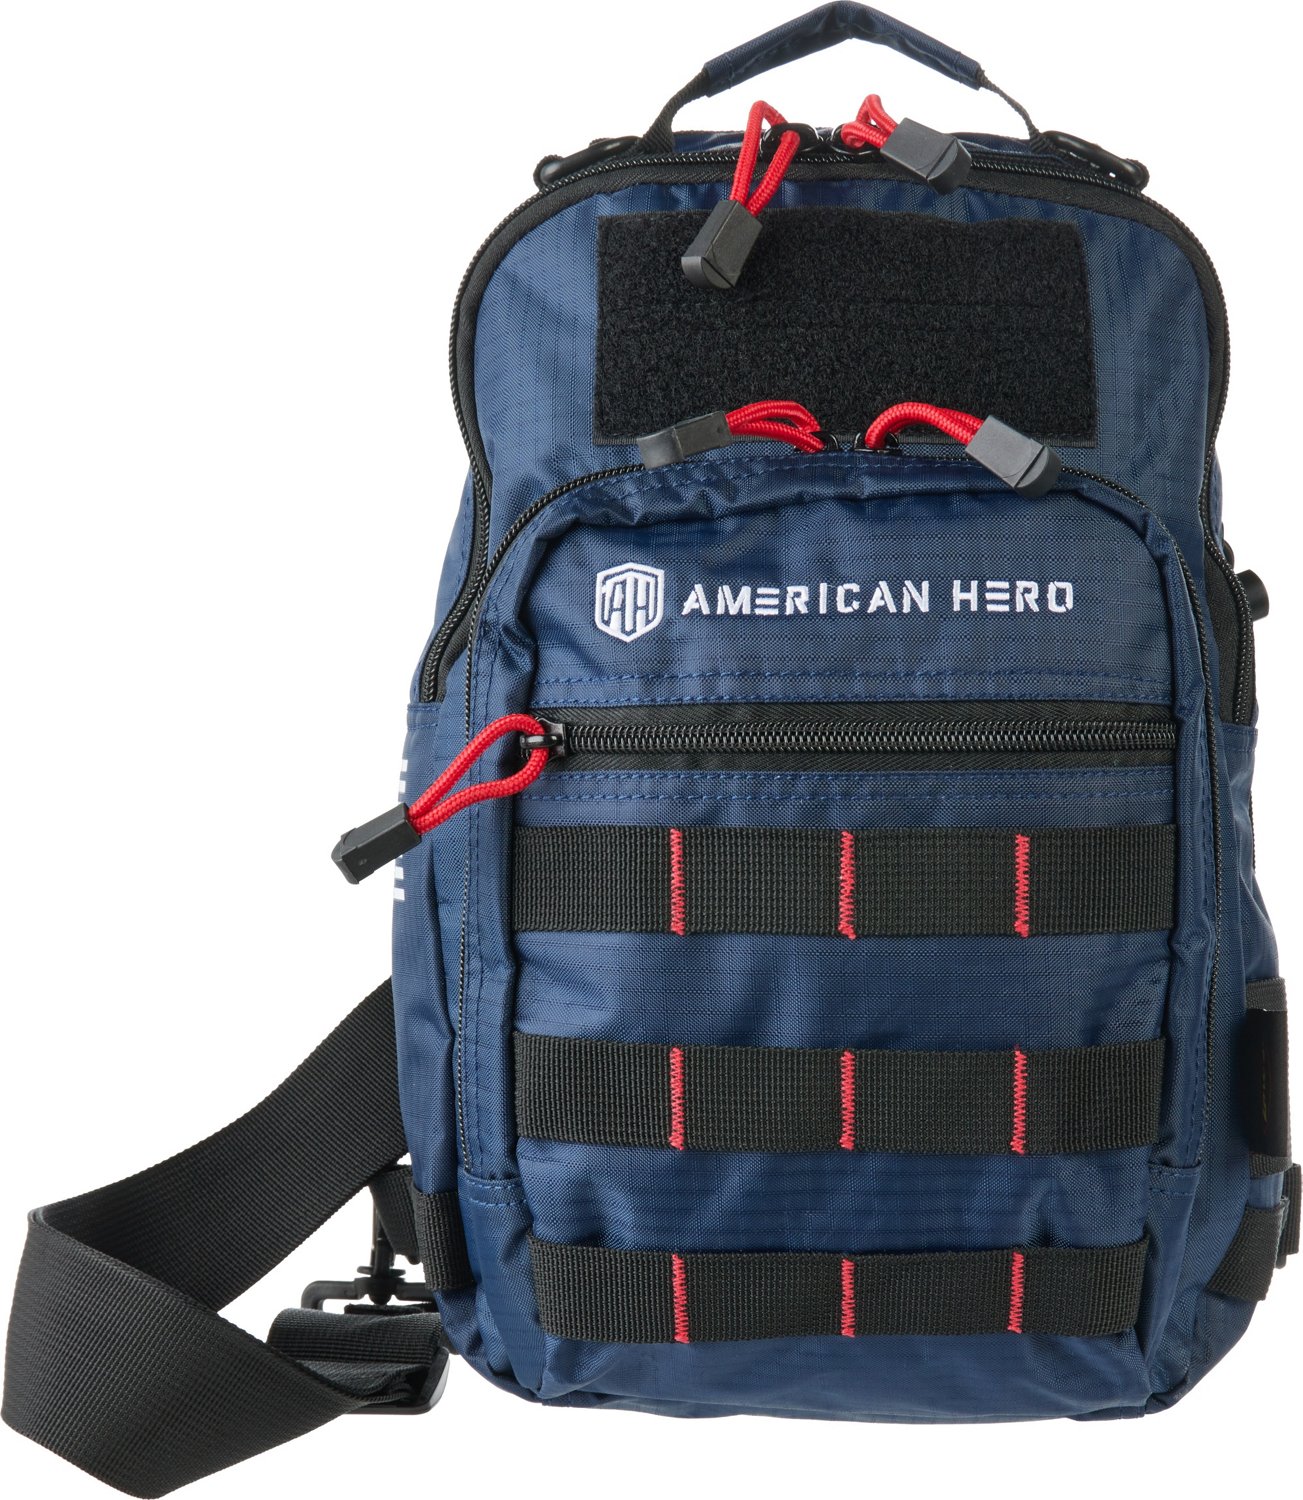 Academy Sports + Outdoors Lew's American Hero 3600 Tackle Sling